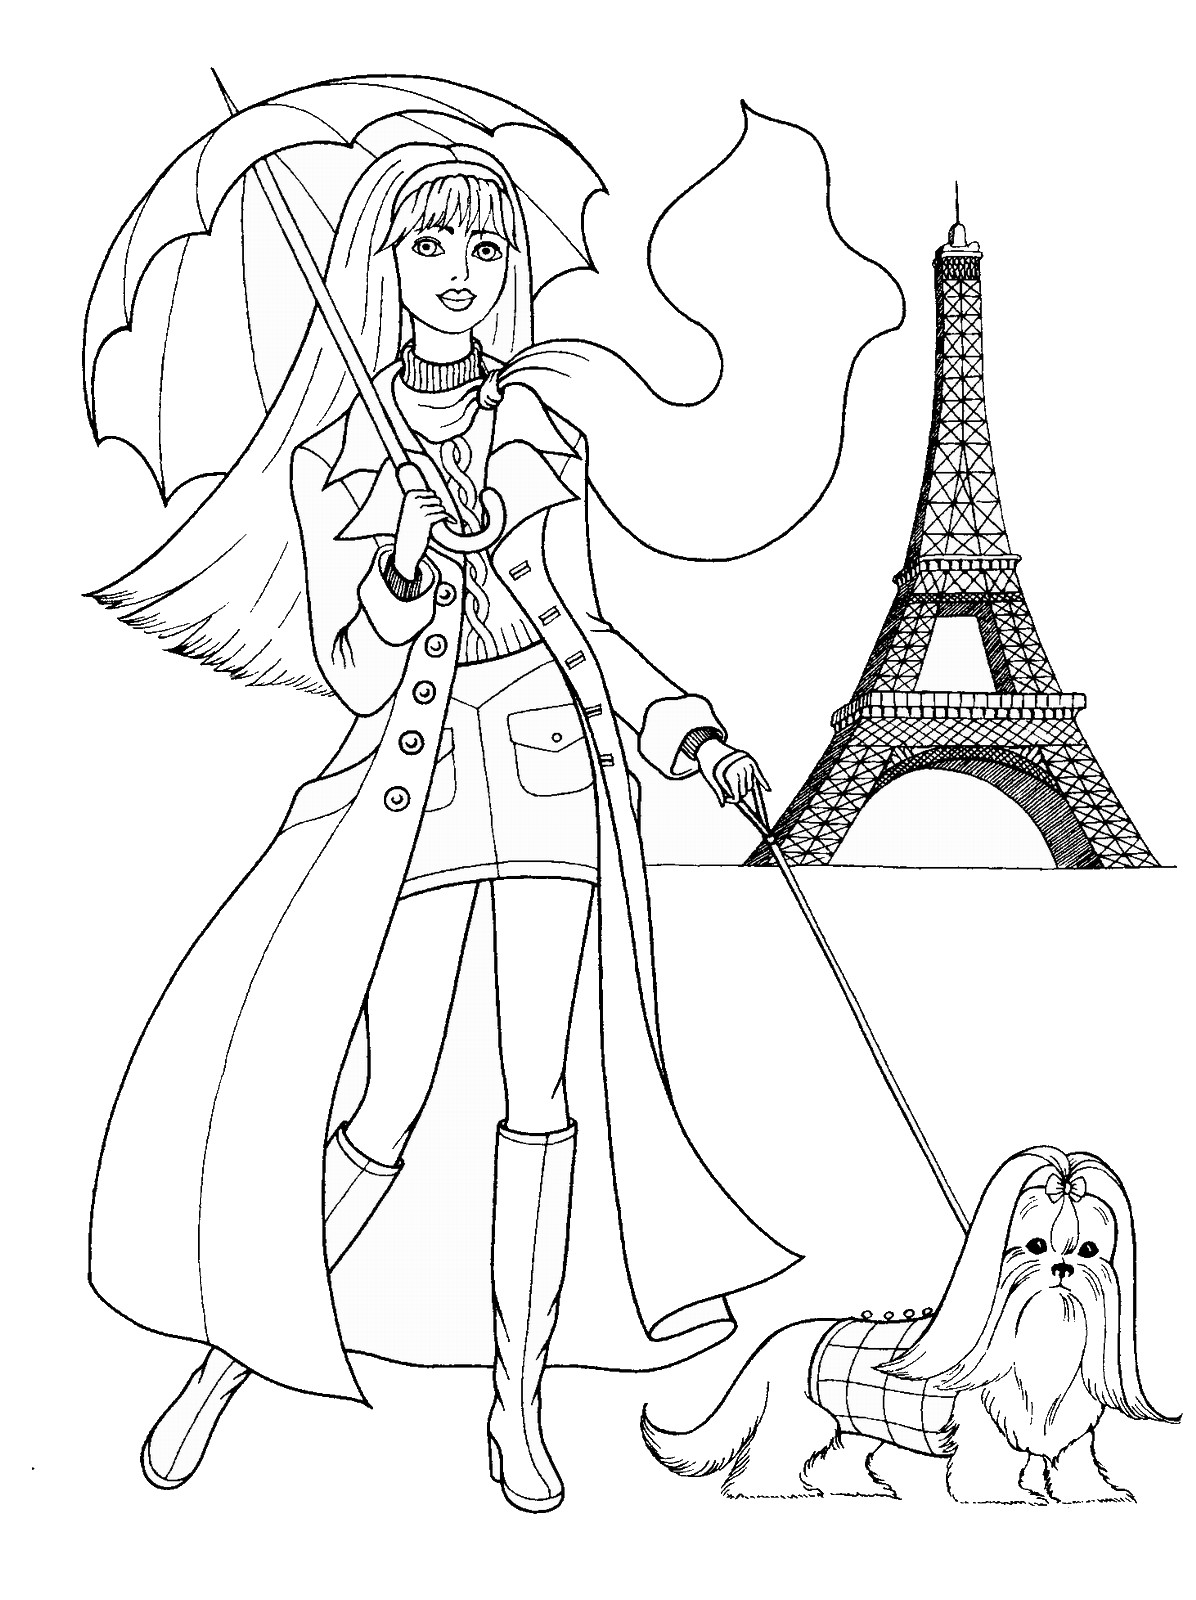 Fashion Design Coloring Pages Free Wallpaper